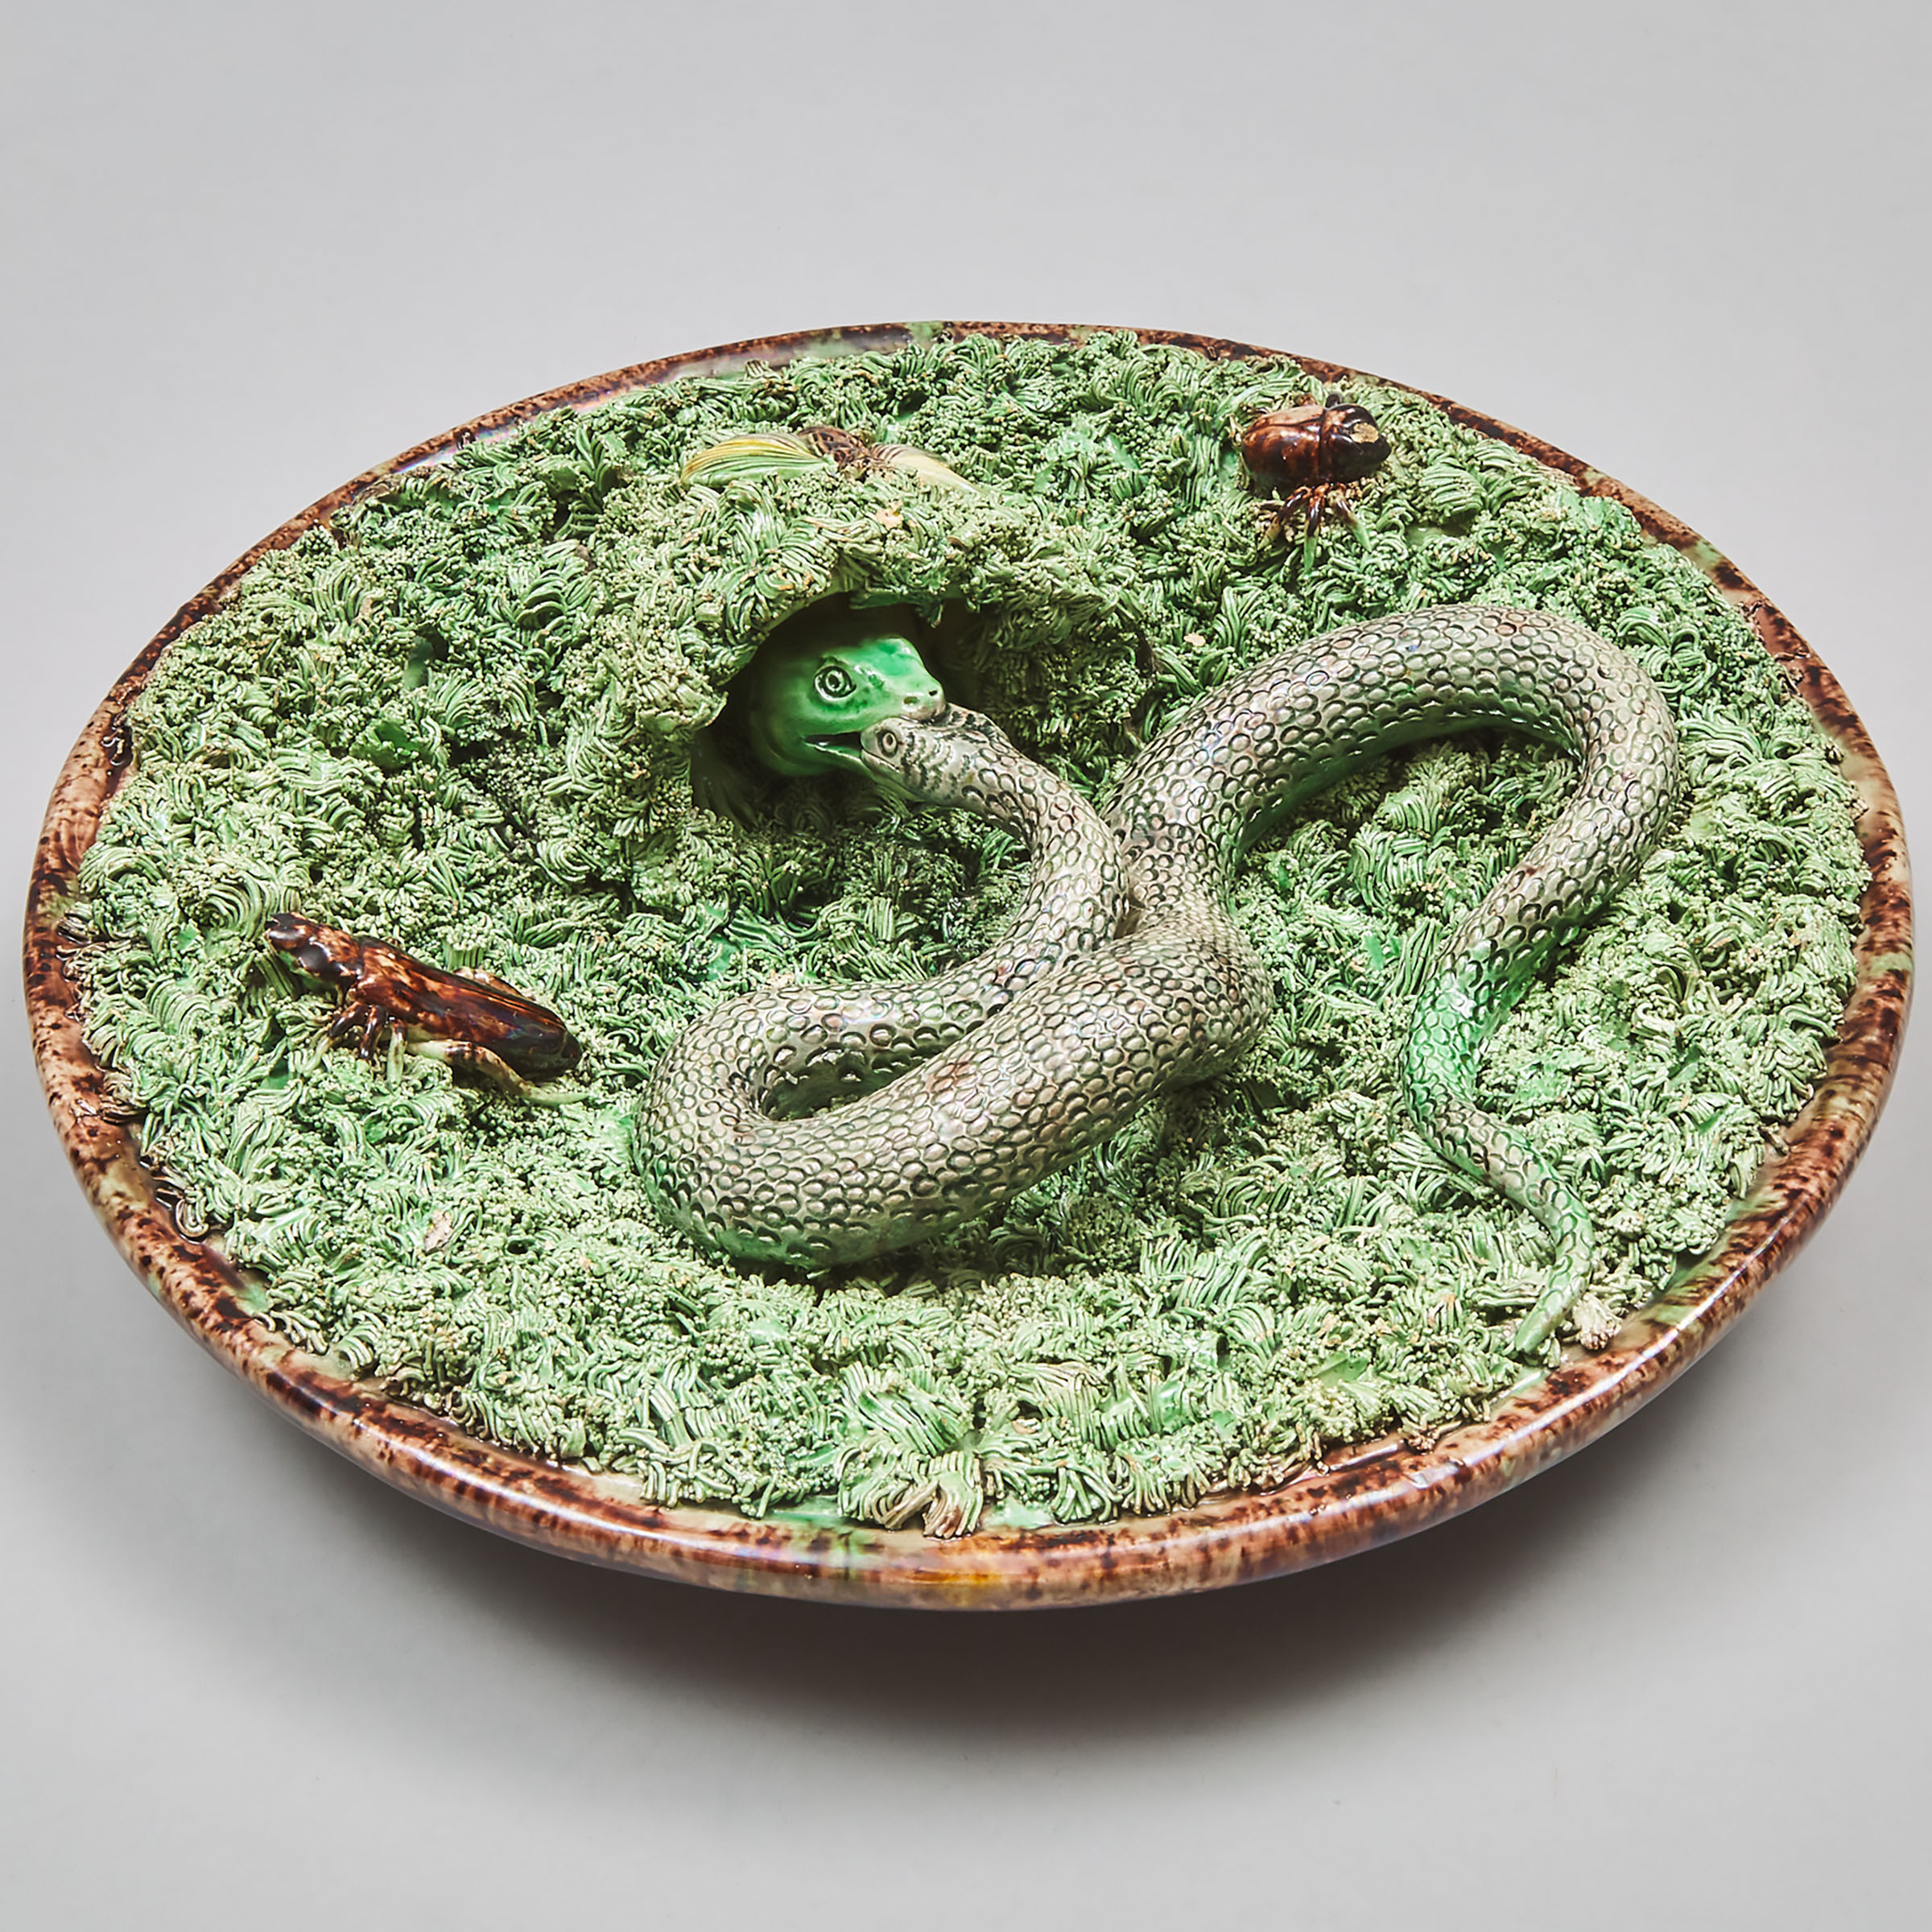 Mafra Majolica Palissy-Style Circular Wall Plaque, late 19th century